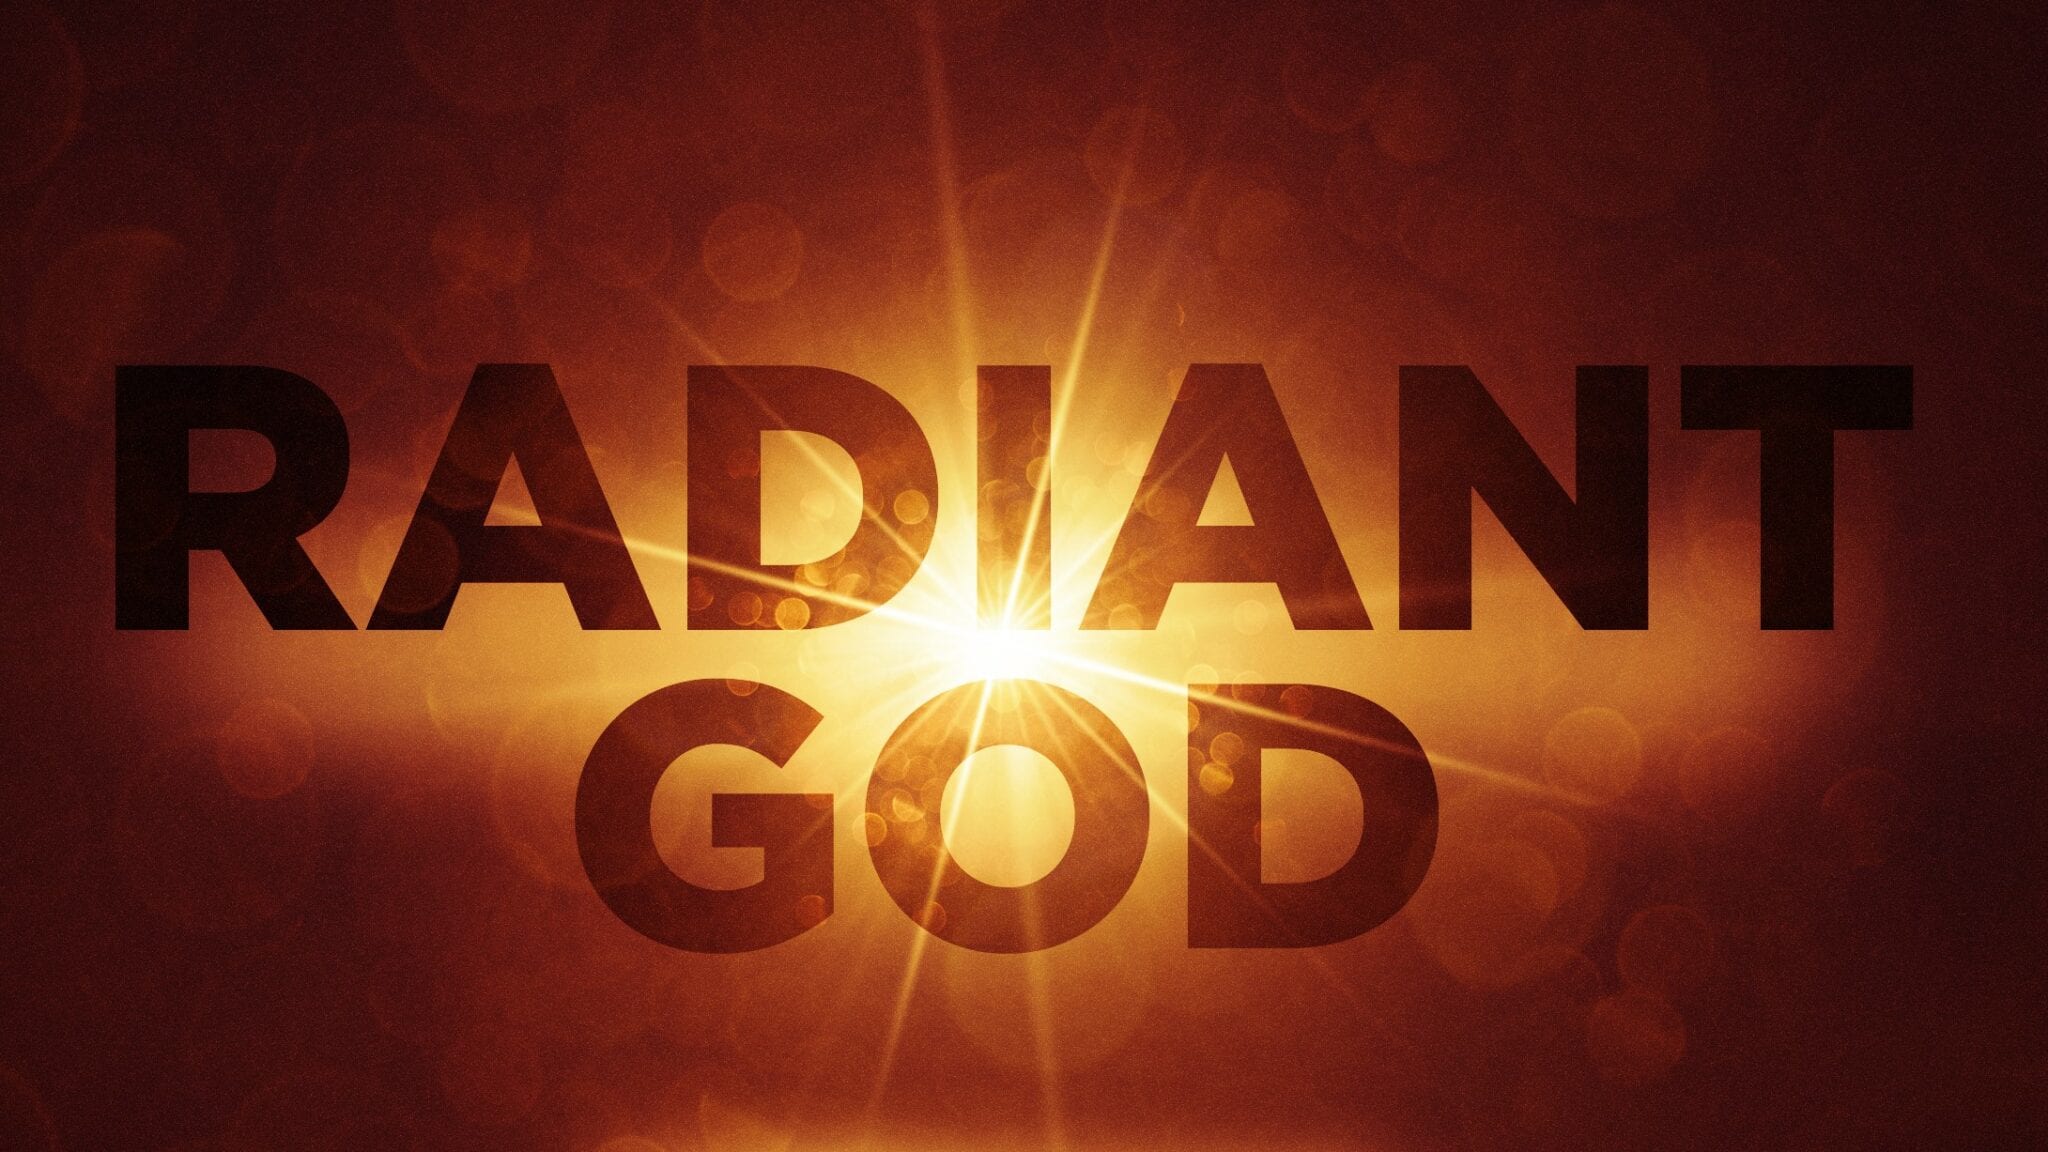 Radiant God: What Is Love ?